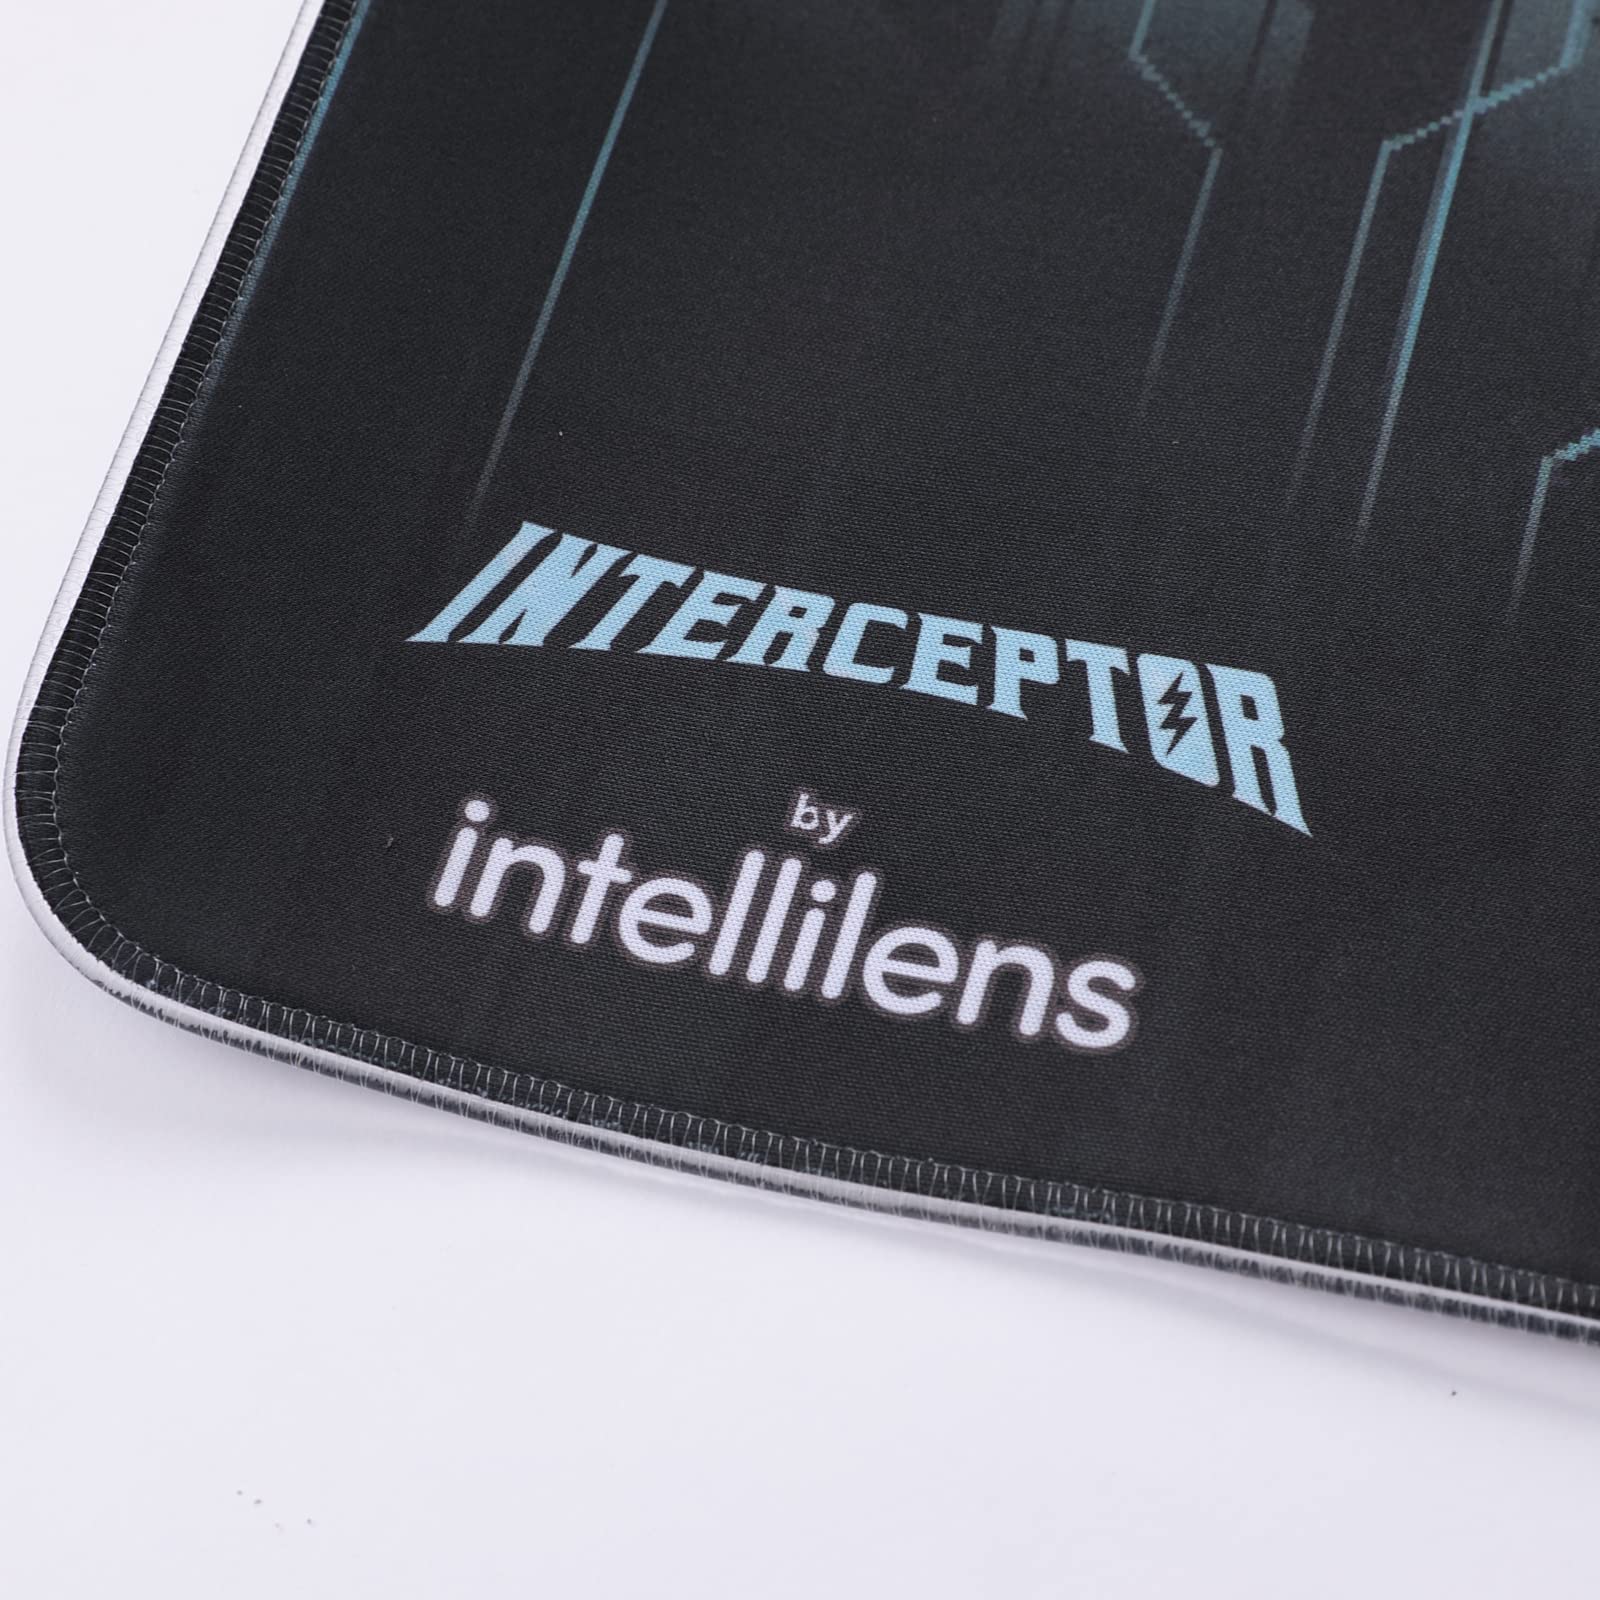 INTERCEPTOR by Intellilens RGB Gaming Mouse Pad | Anti Slip Base, Control Edition, Water Resistance, Precision Move, Premium Leather mat for Desktop & Laptop | LED Glowing Lights